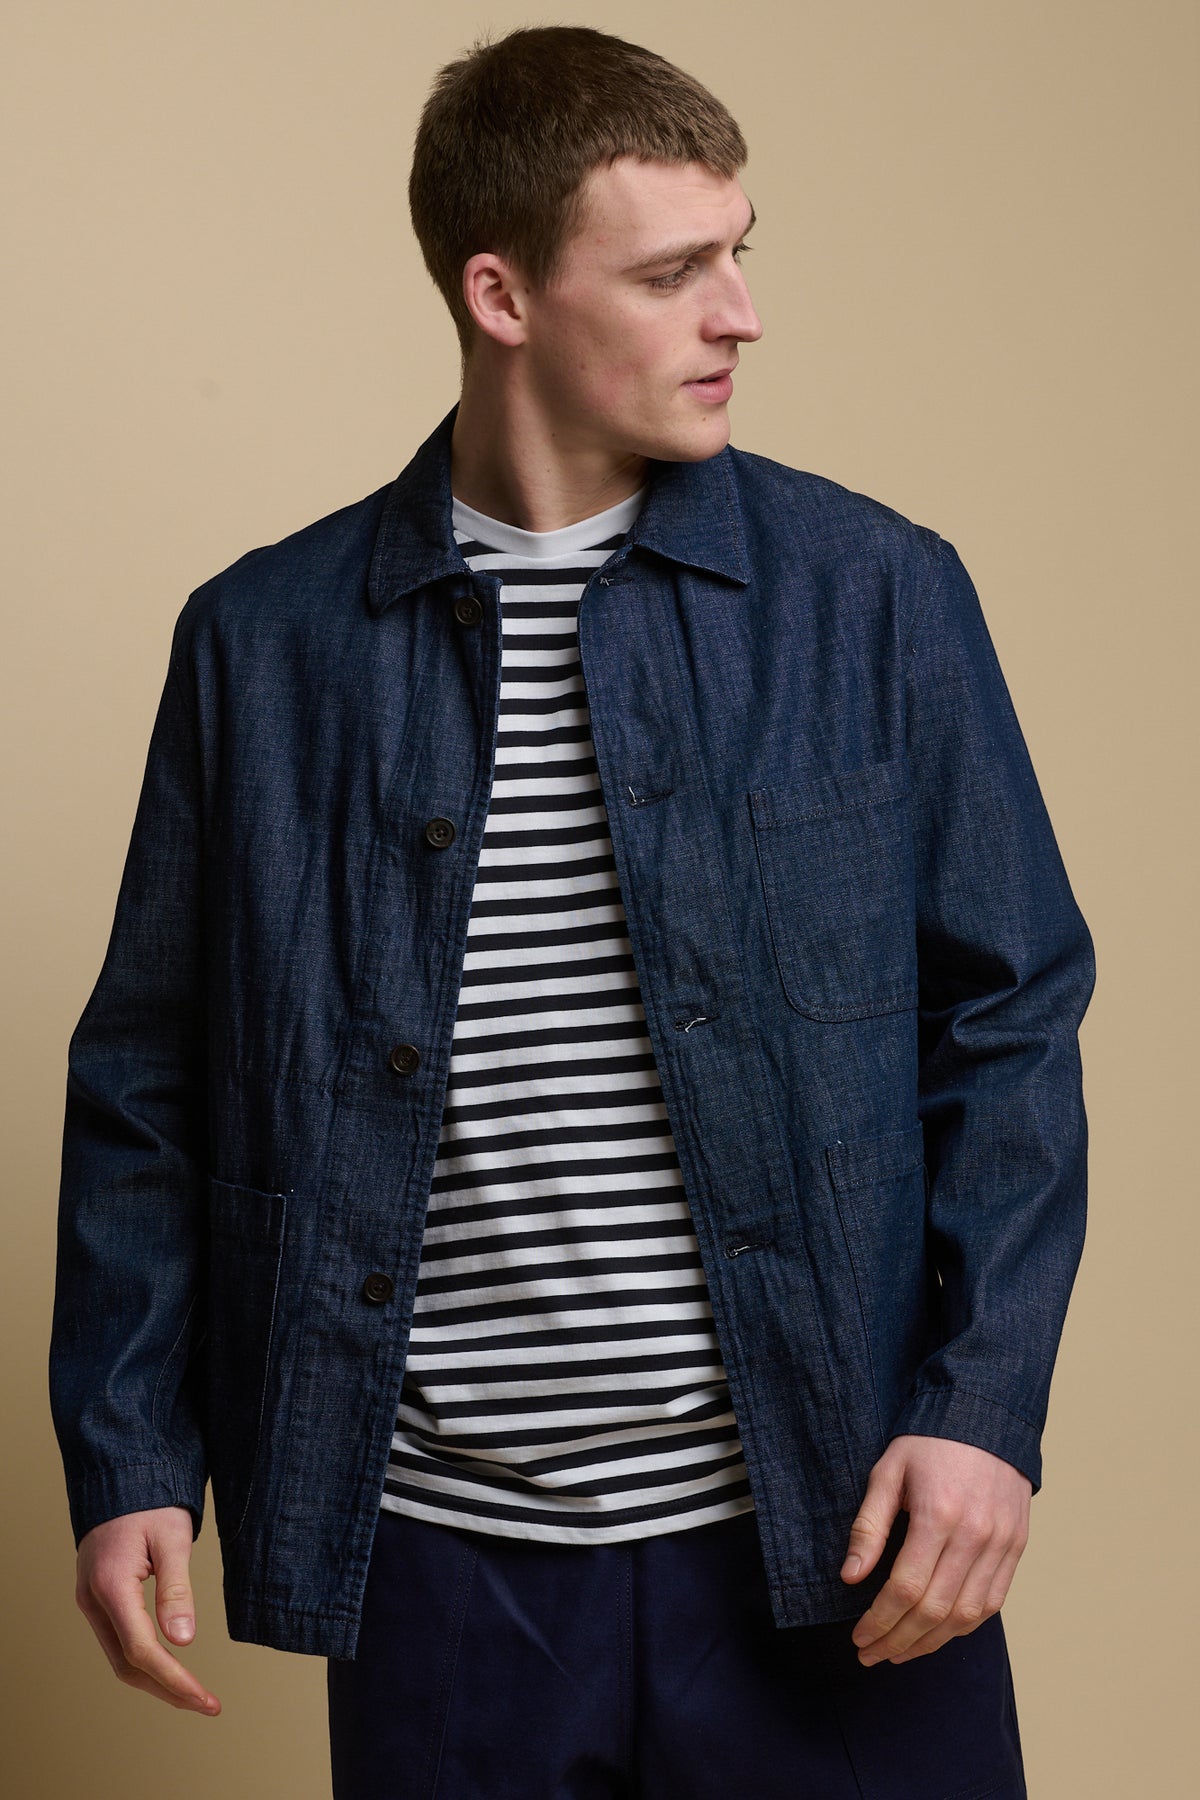 
            Thigh up image of male wearing open chore jacket in denim over striped t-shirt